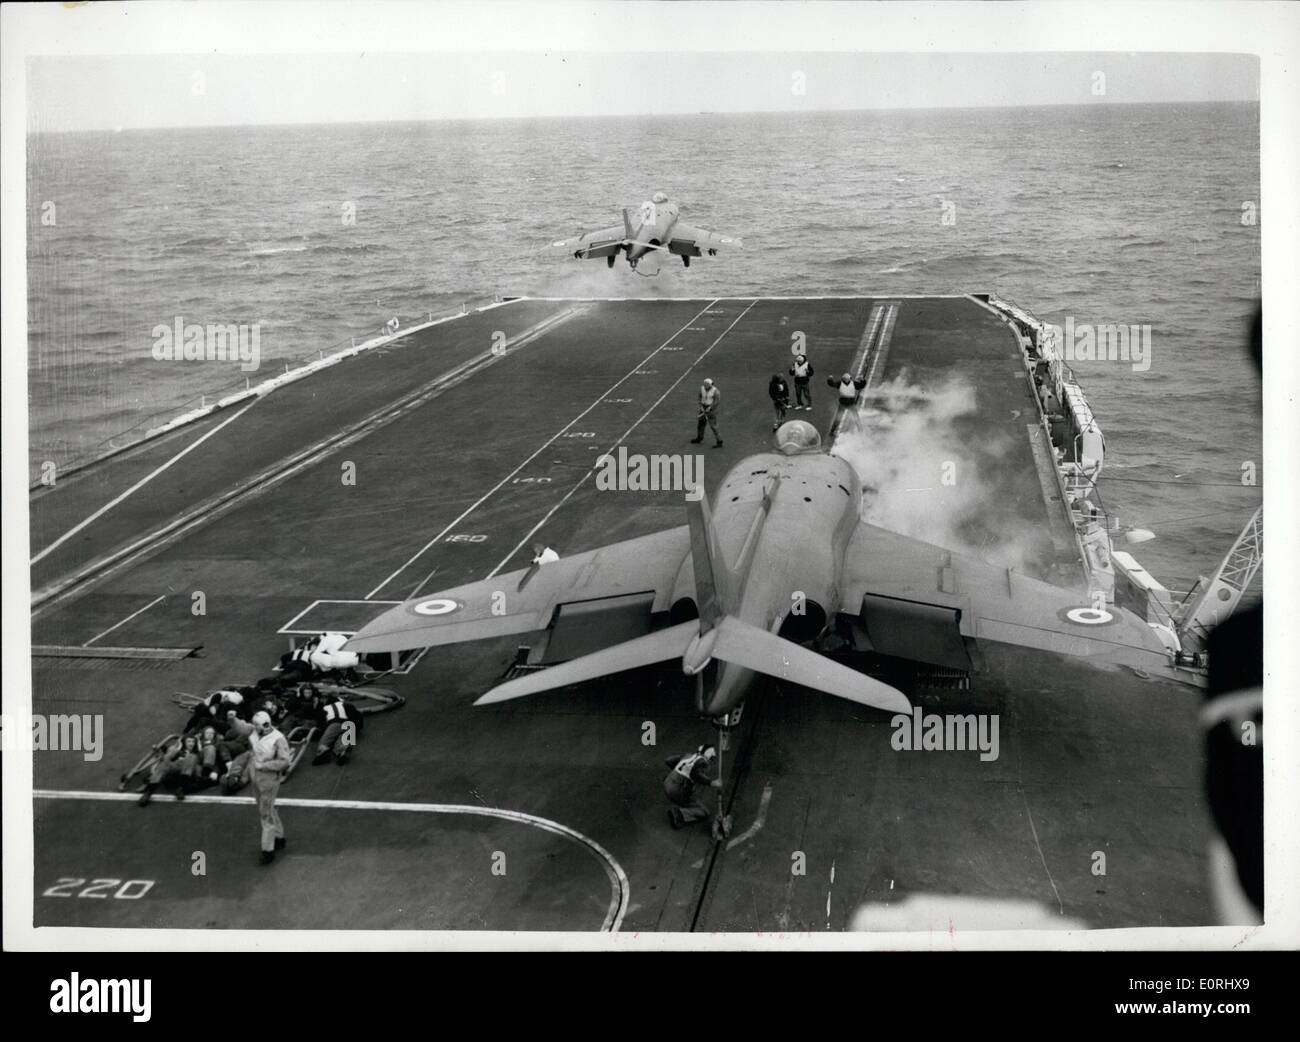 Sep. 17, 1959 - 17-9-59 Flying exercises from H.M.S. Victorious. Members of the press today spent a day at sea in H.M.S. Victorious, flagship of the Aircraft Carrier Squadron, to witness flying exercises, off Portsmouth. Keystone Photo Shows: The scene aboard H.M.S. Victorious today, as Scimitars take off by Steam Catapult, during today's flying exercises. Stock Photo